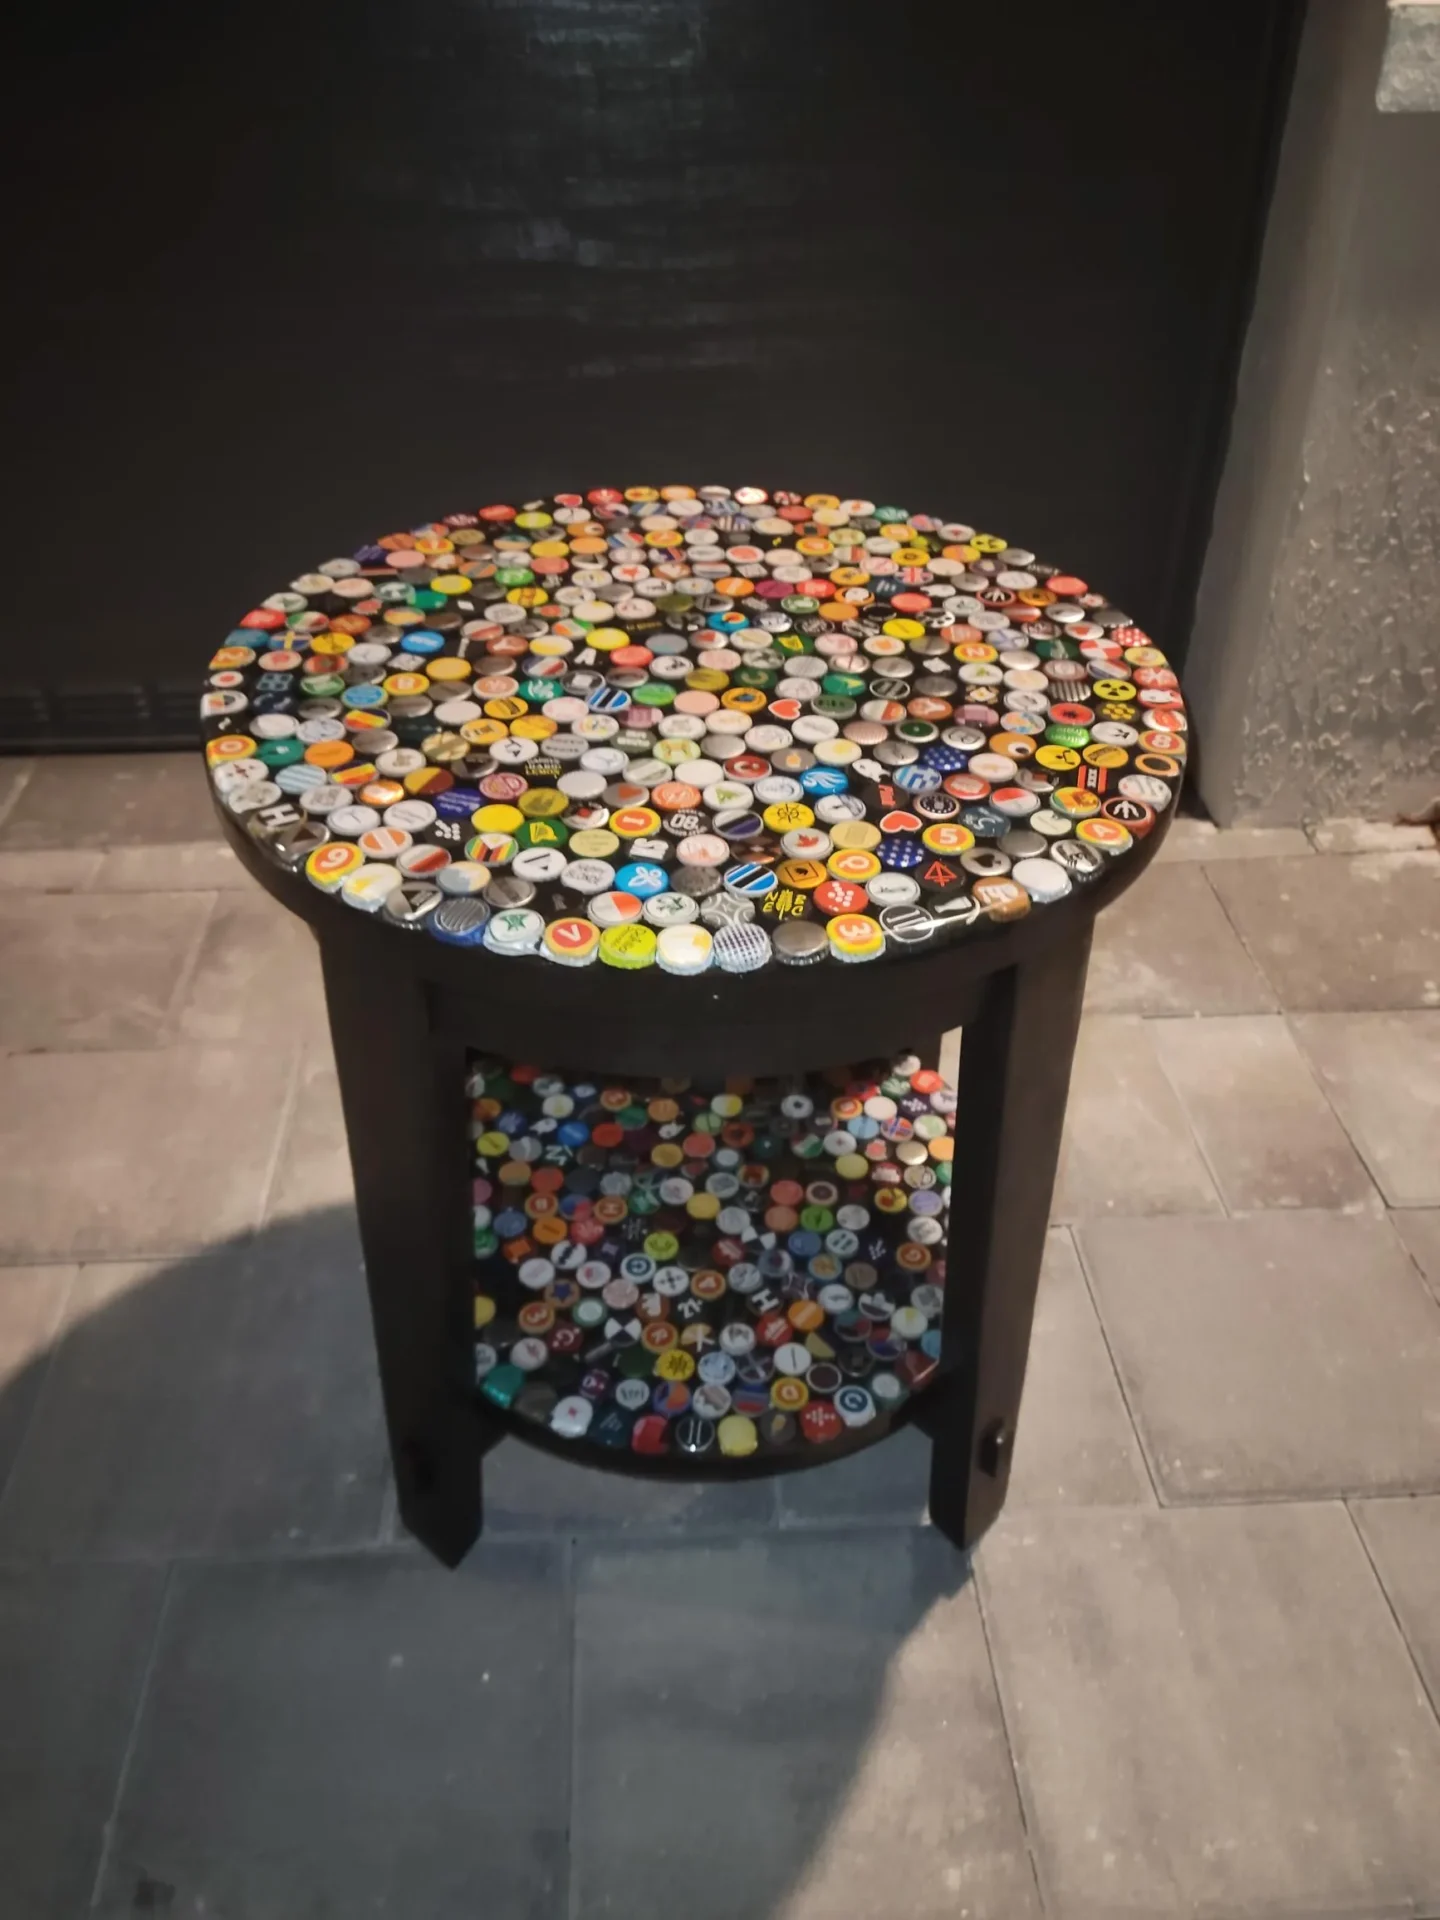 A table with many different colored bottle caps on it.